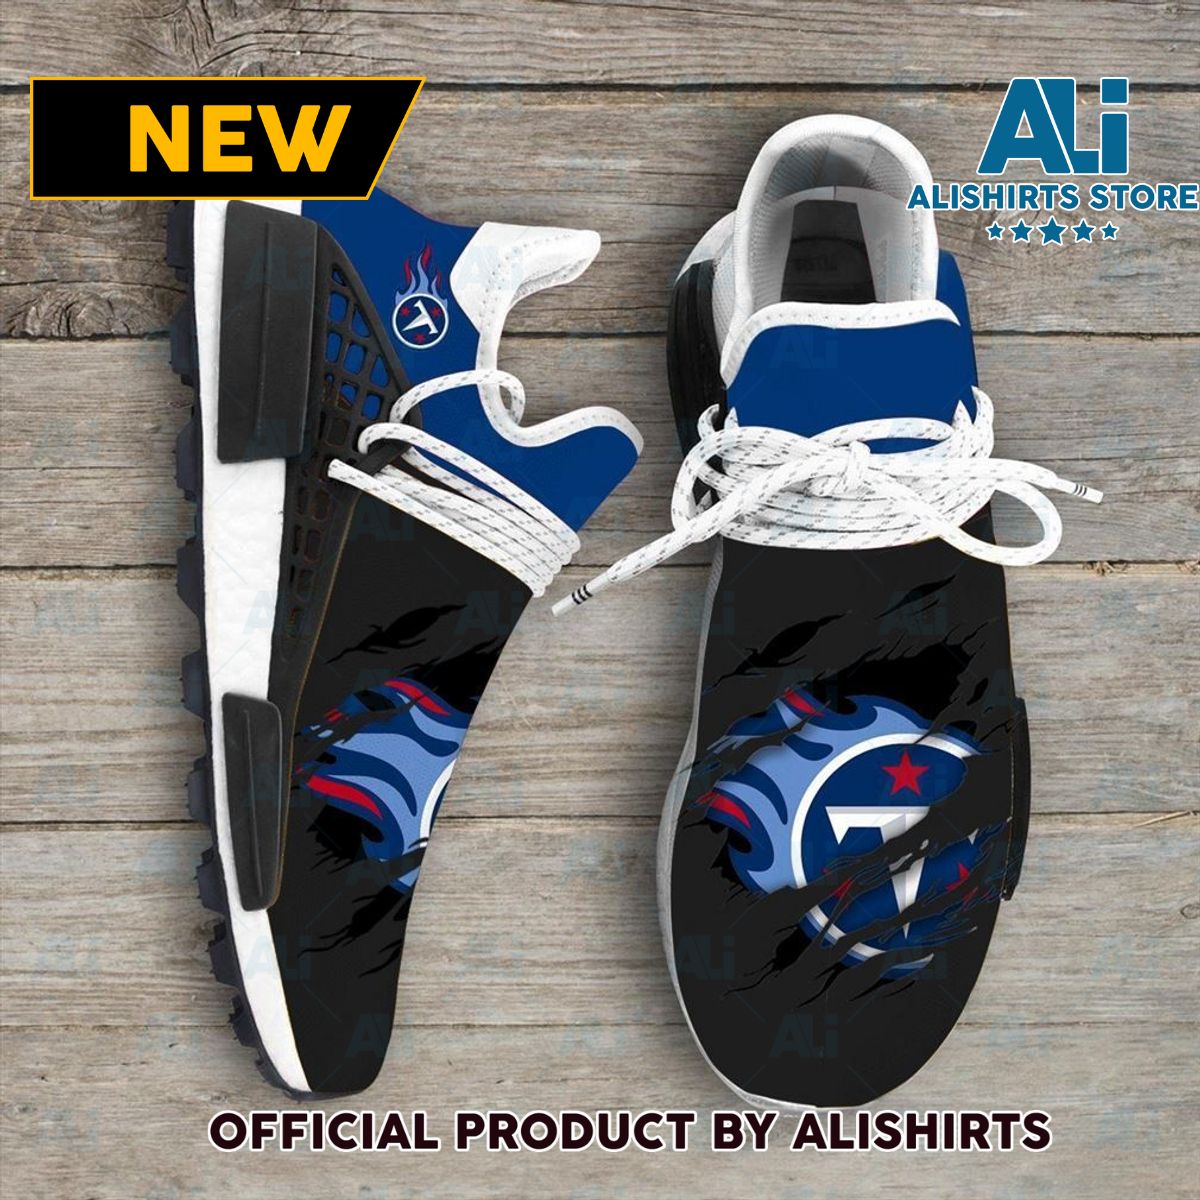 Tennessee Titans NFL Sport Teams NMD Human Race Adidas NMD Sneakers